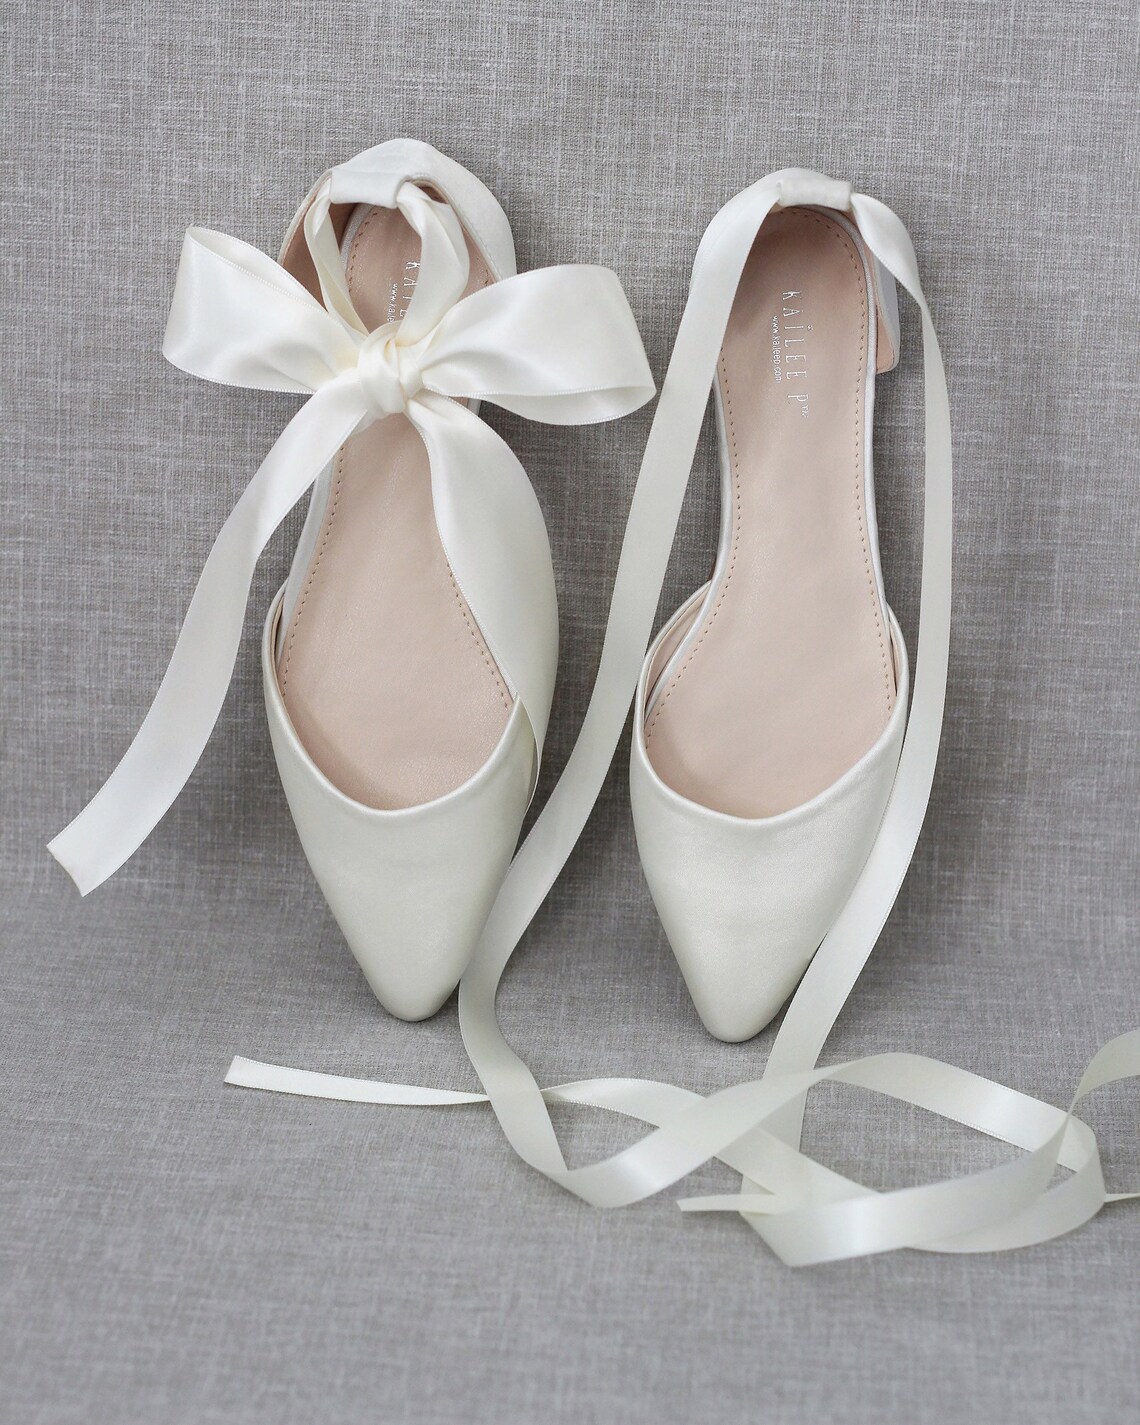 Ivory Satin Pointy Toe Flats with satin ANKLE TIE or BALLERINA | Etsy